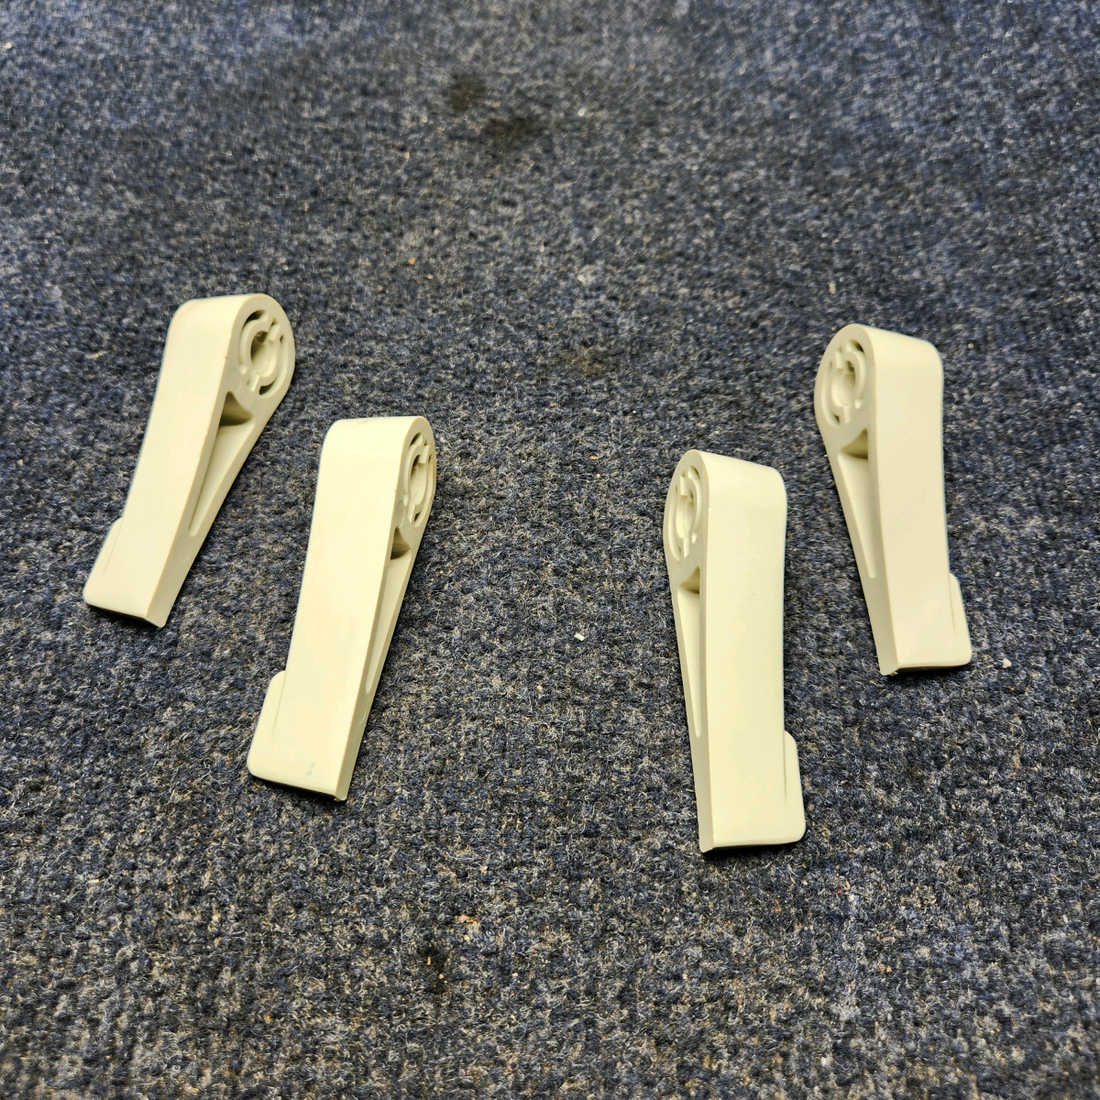 Used aircraft parts for sale, 140171-000 Mooney Texas Several SEAT HANDLE.  PRICE PER EACH.